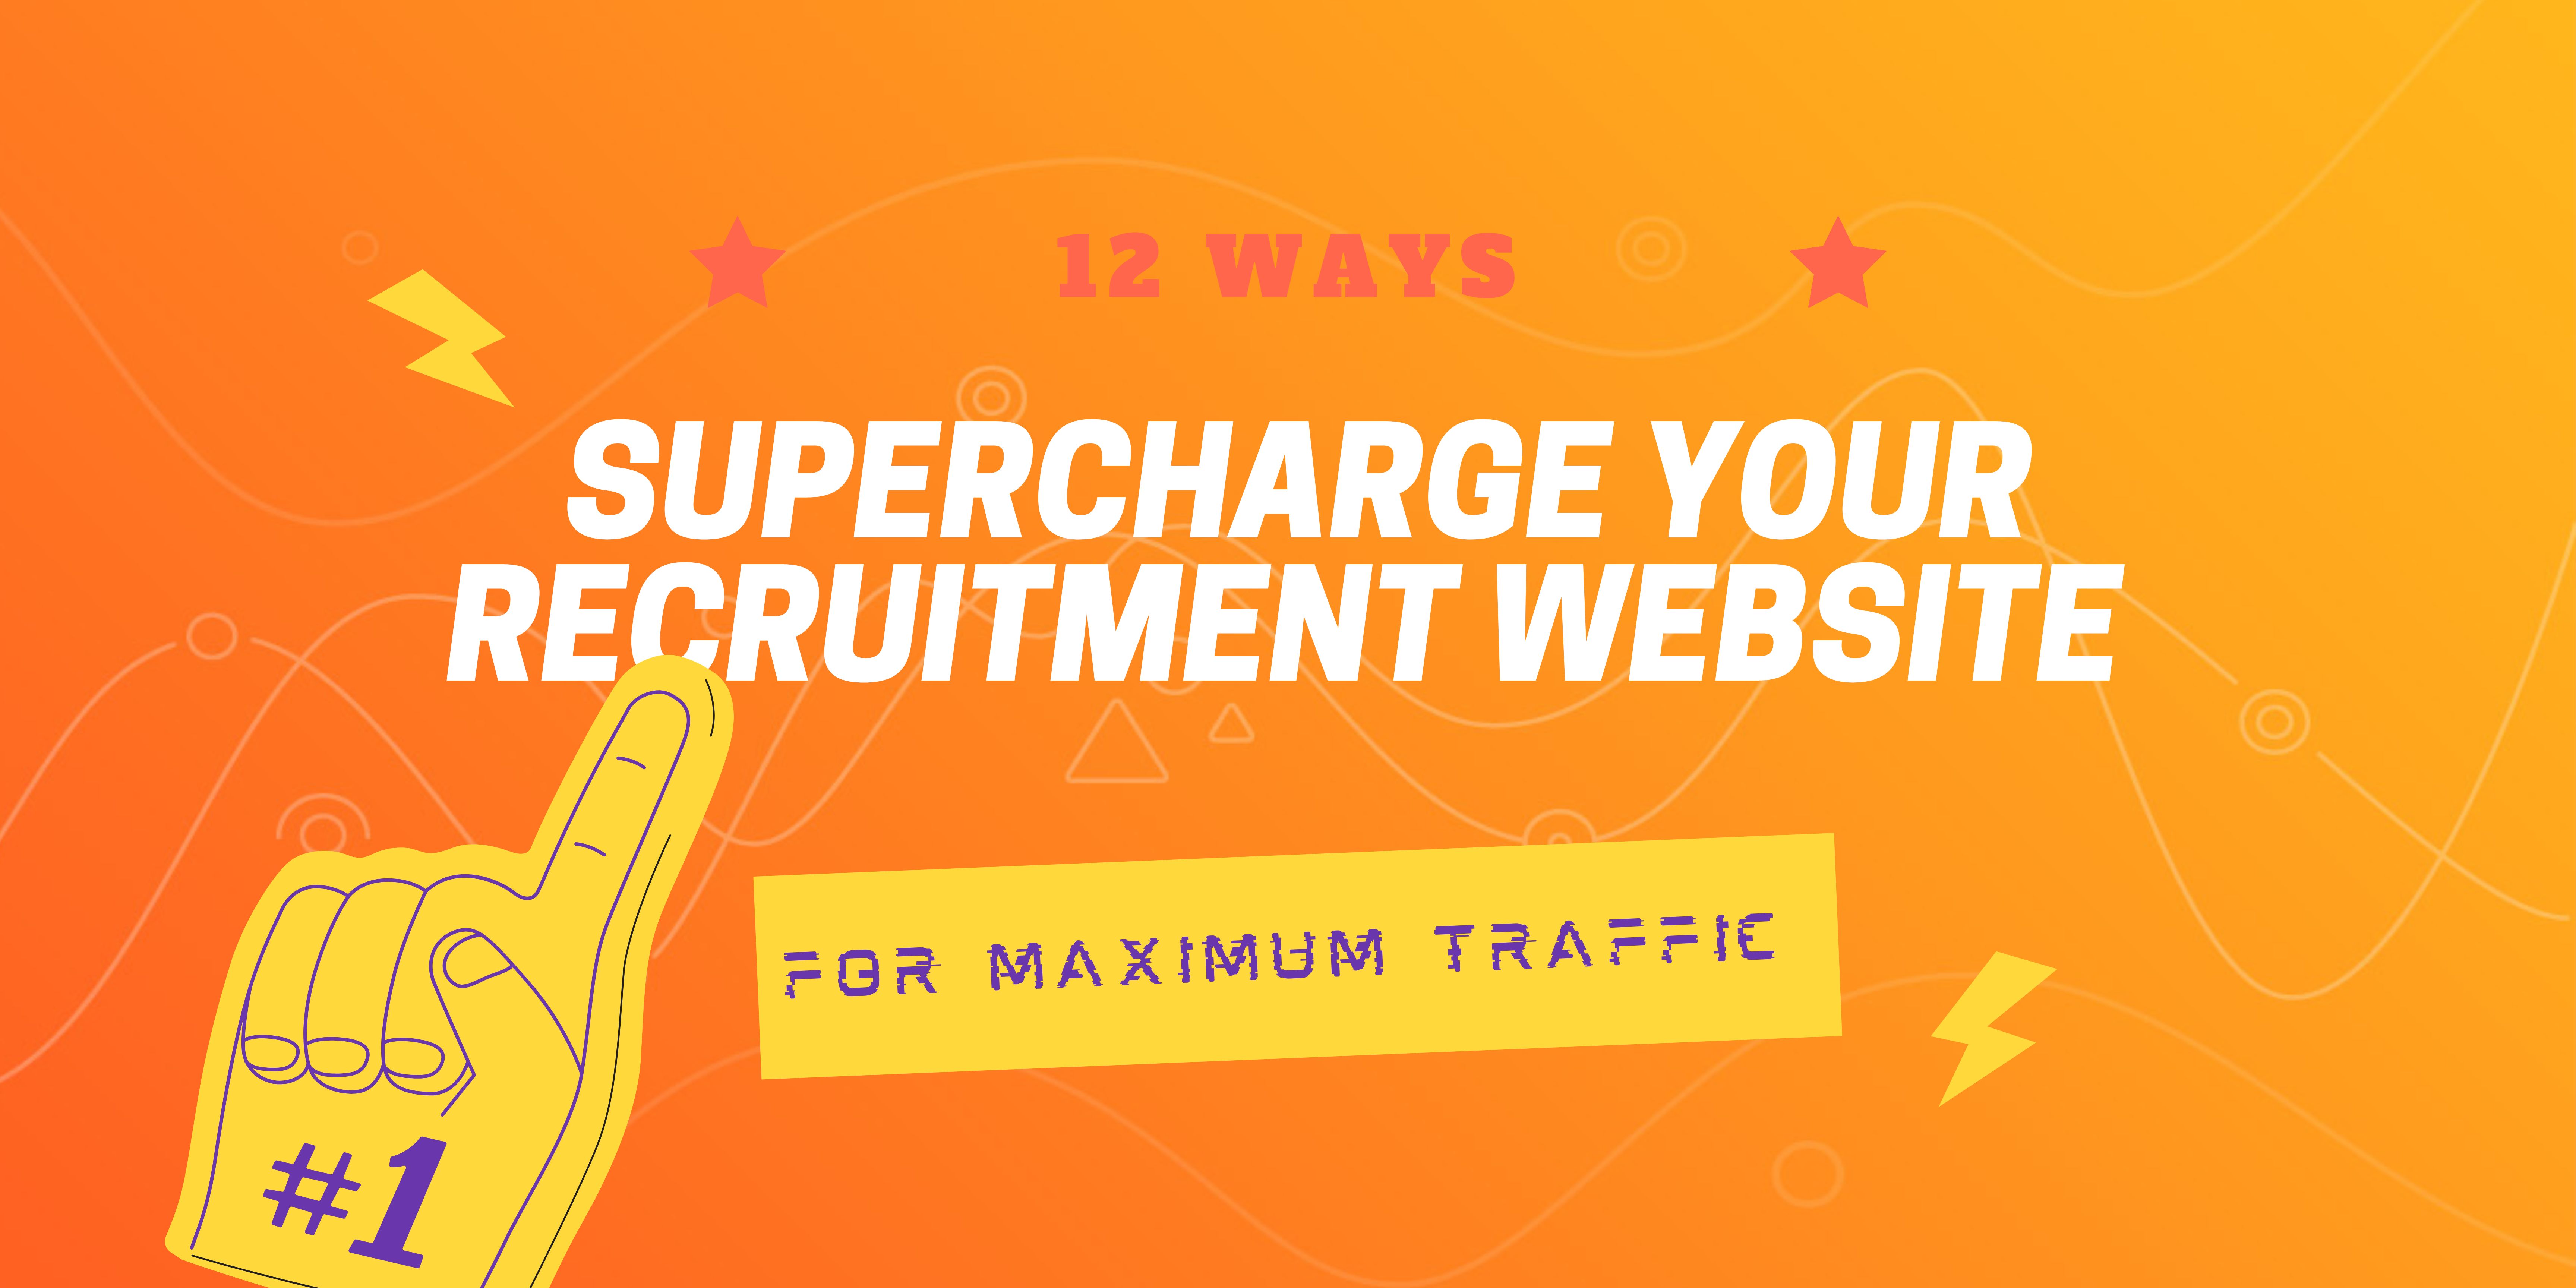 12 Ways to Supercharge Your Recruitment Website for Maximum Traffic